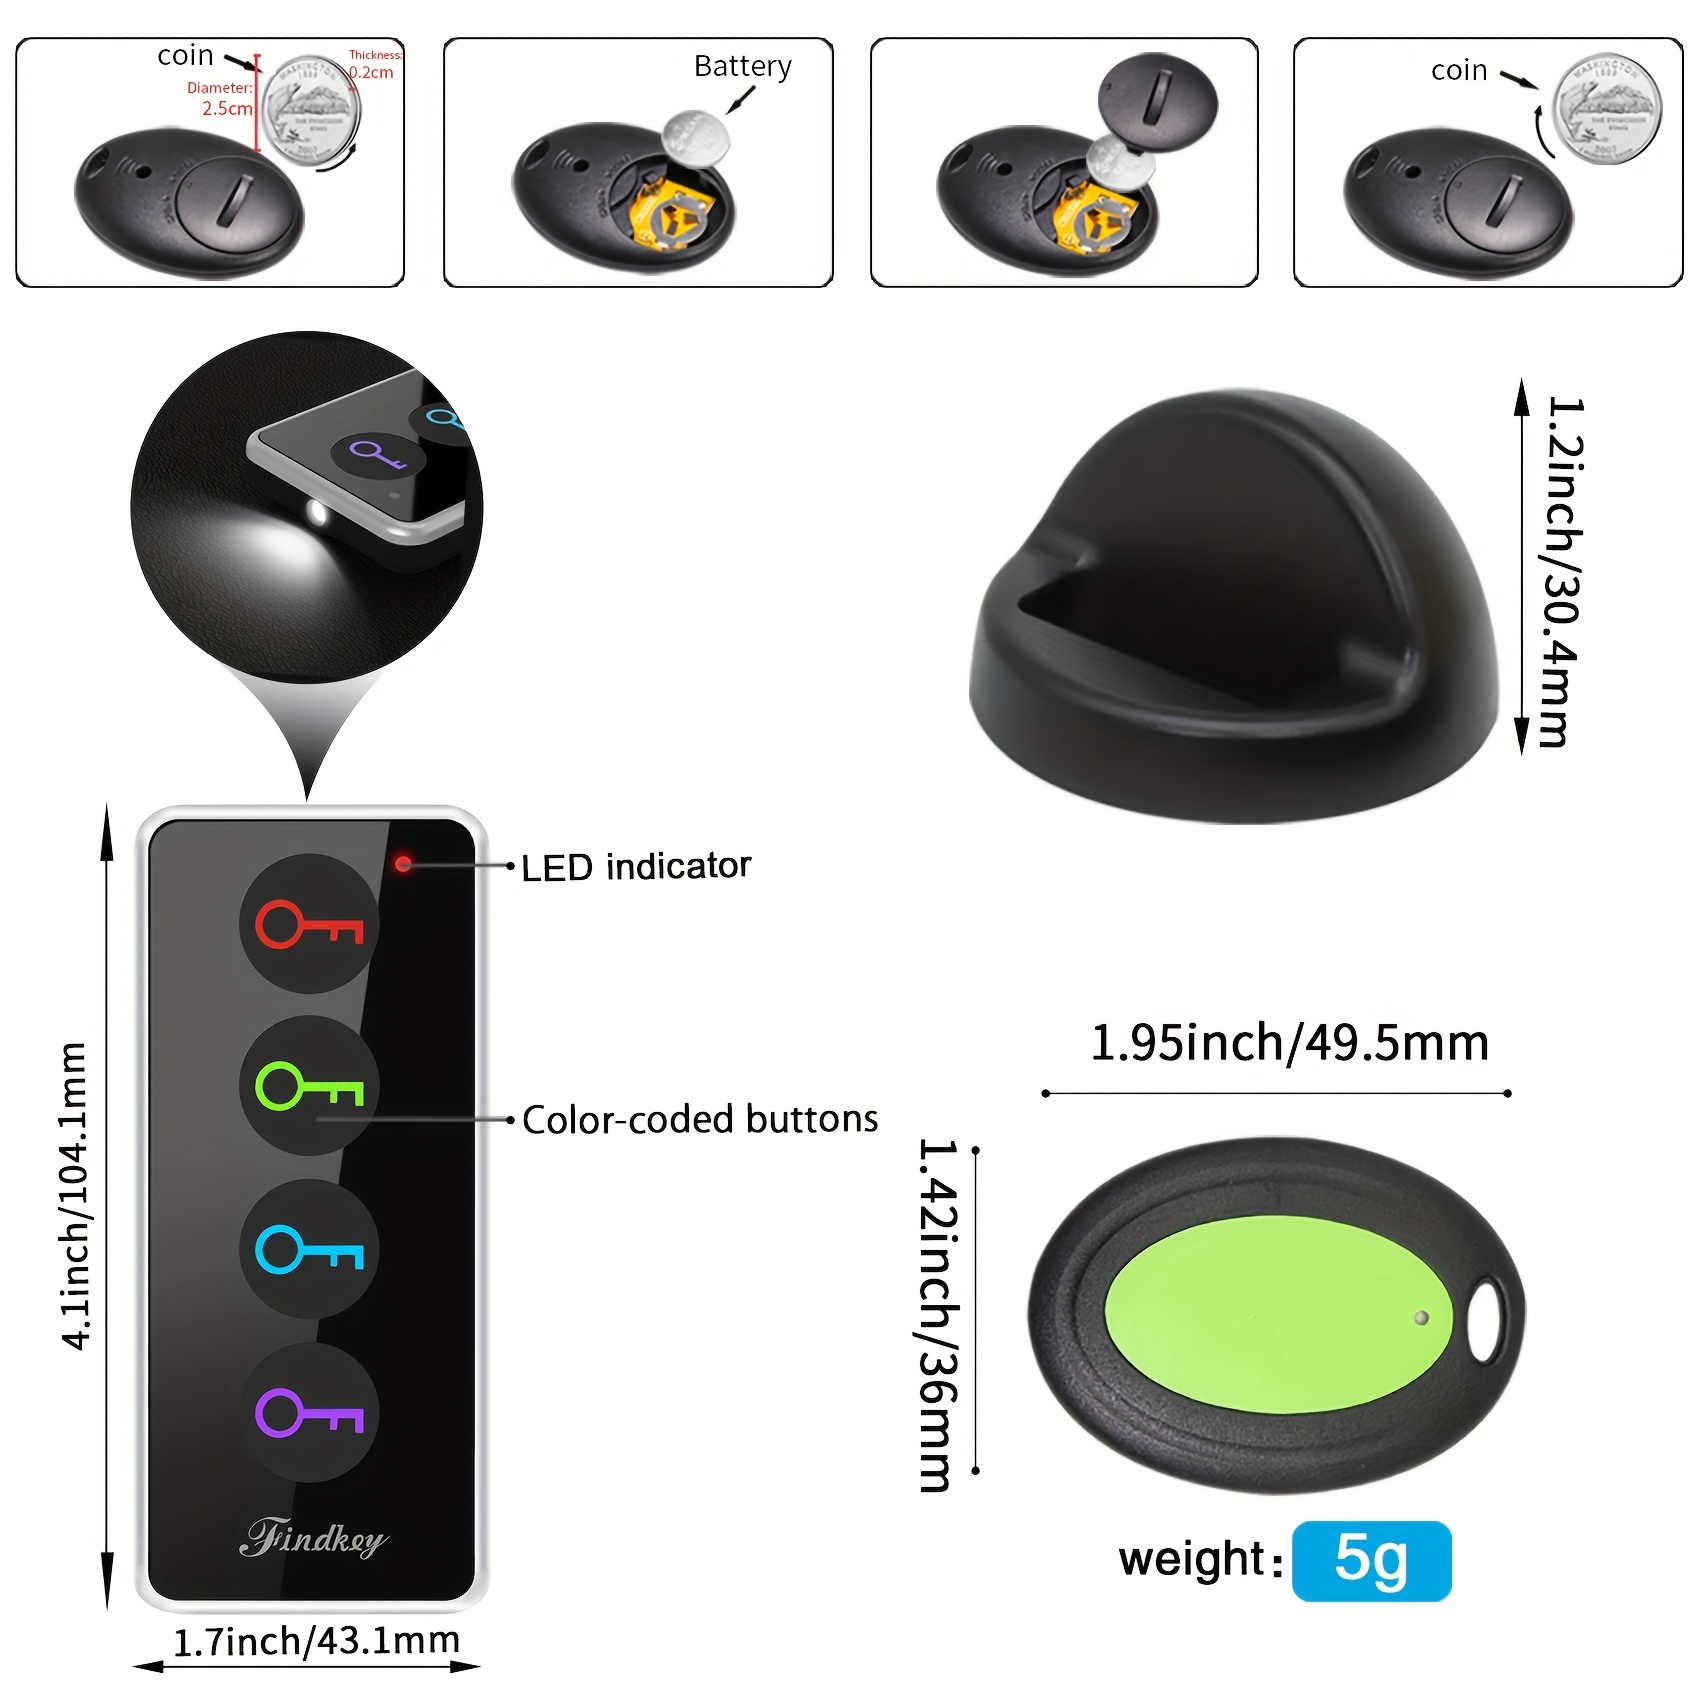 Key Finder, 80db Rf Item Locator With 131ft Working Range And Led